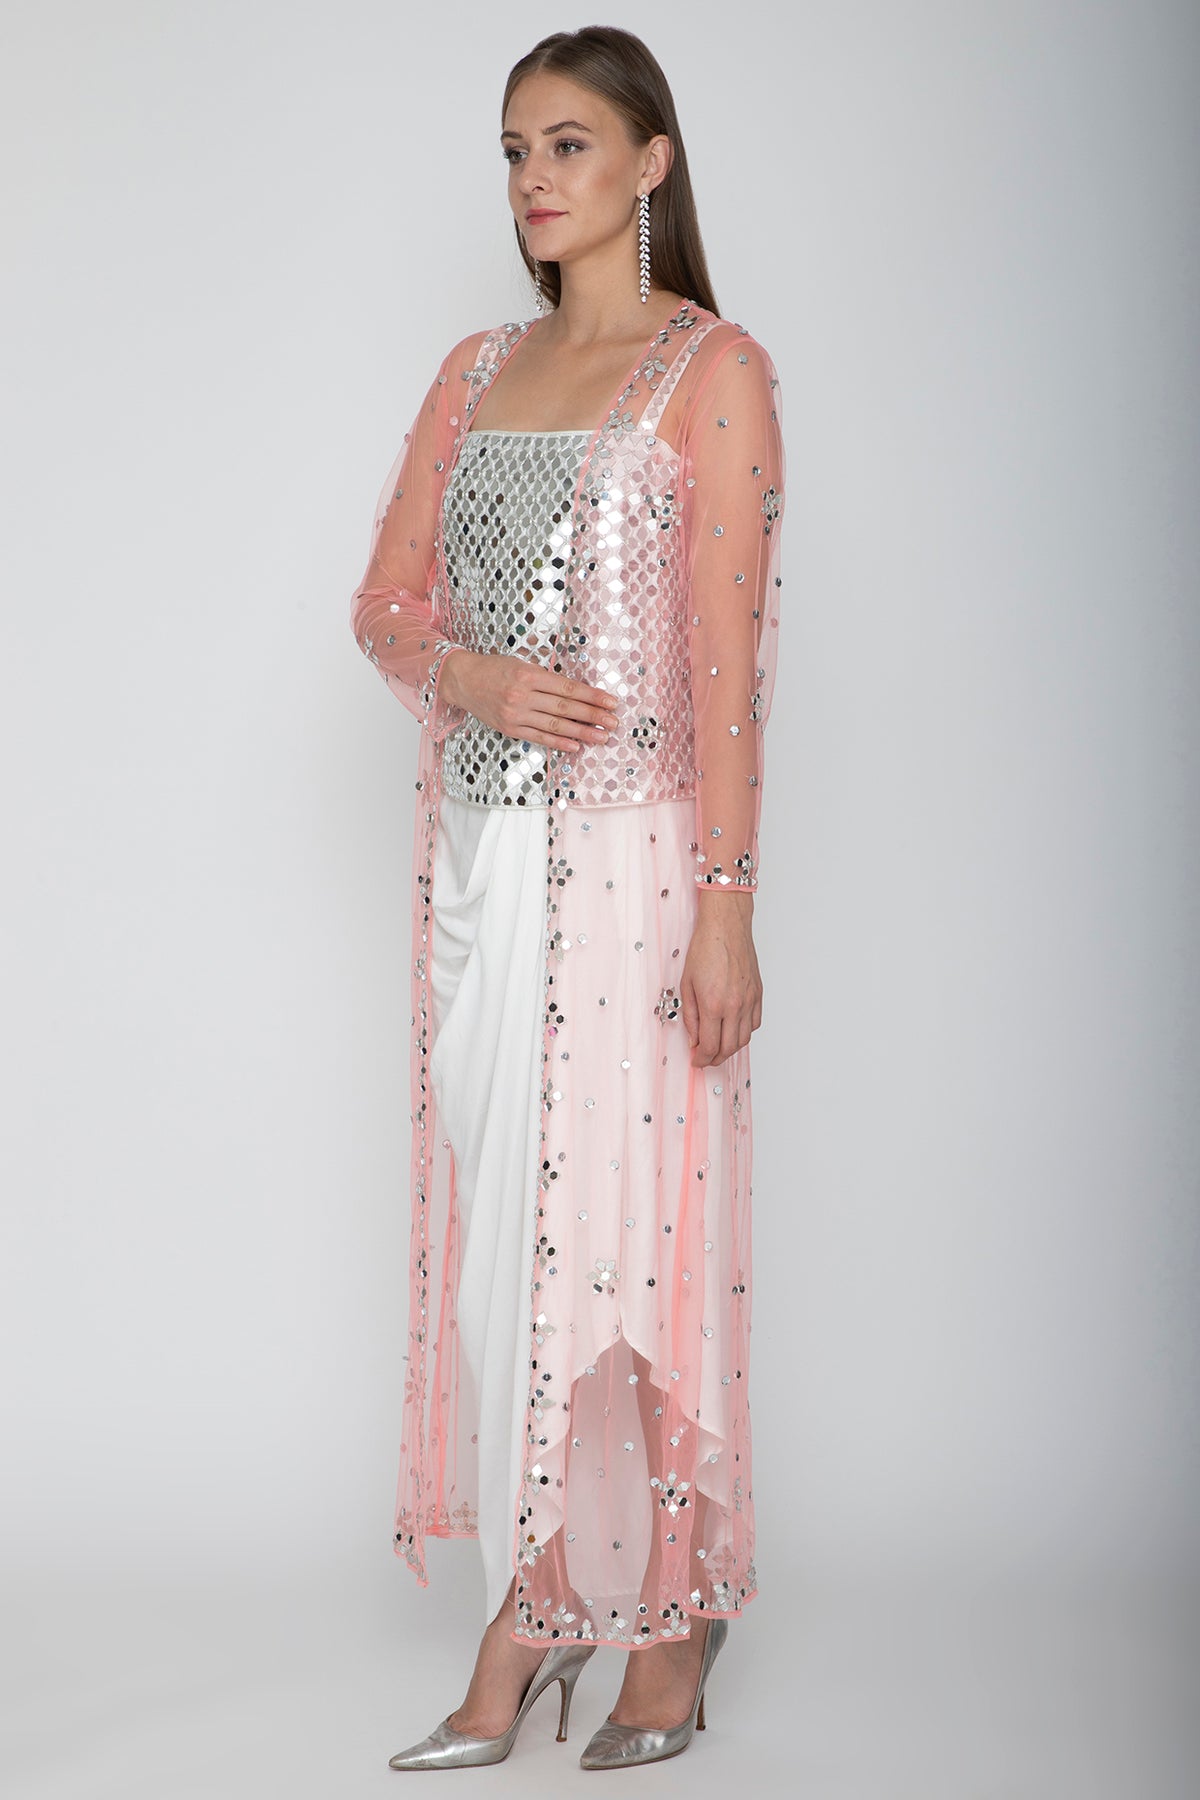 White Embroidered Blouse With Dhoti Skirt & Blush Pink Cape